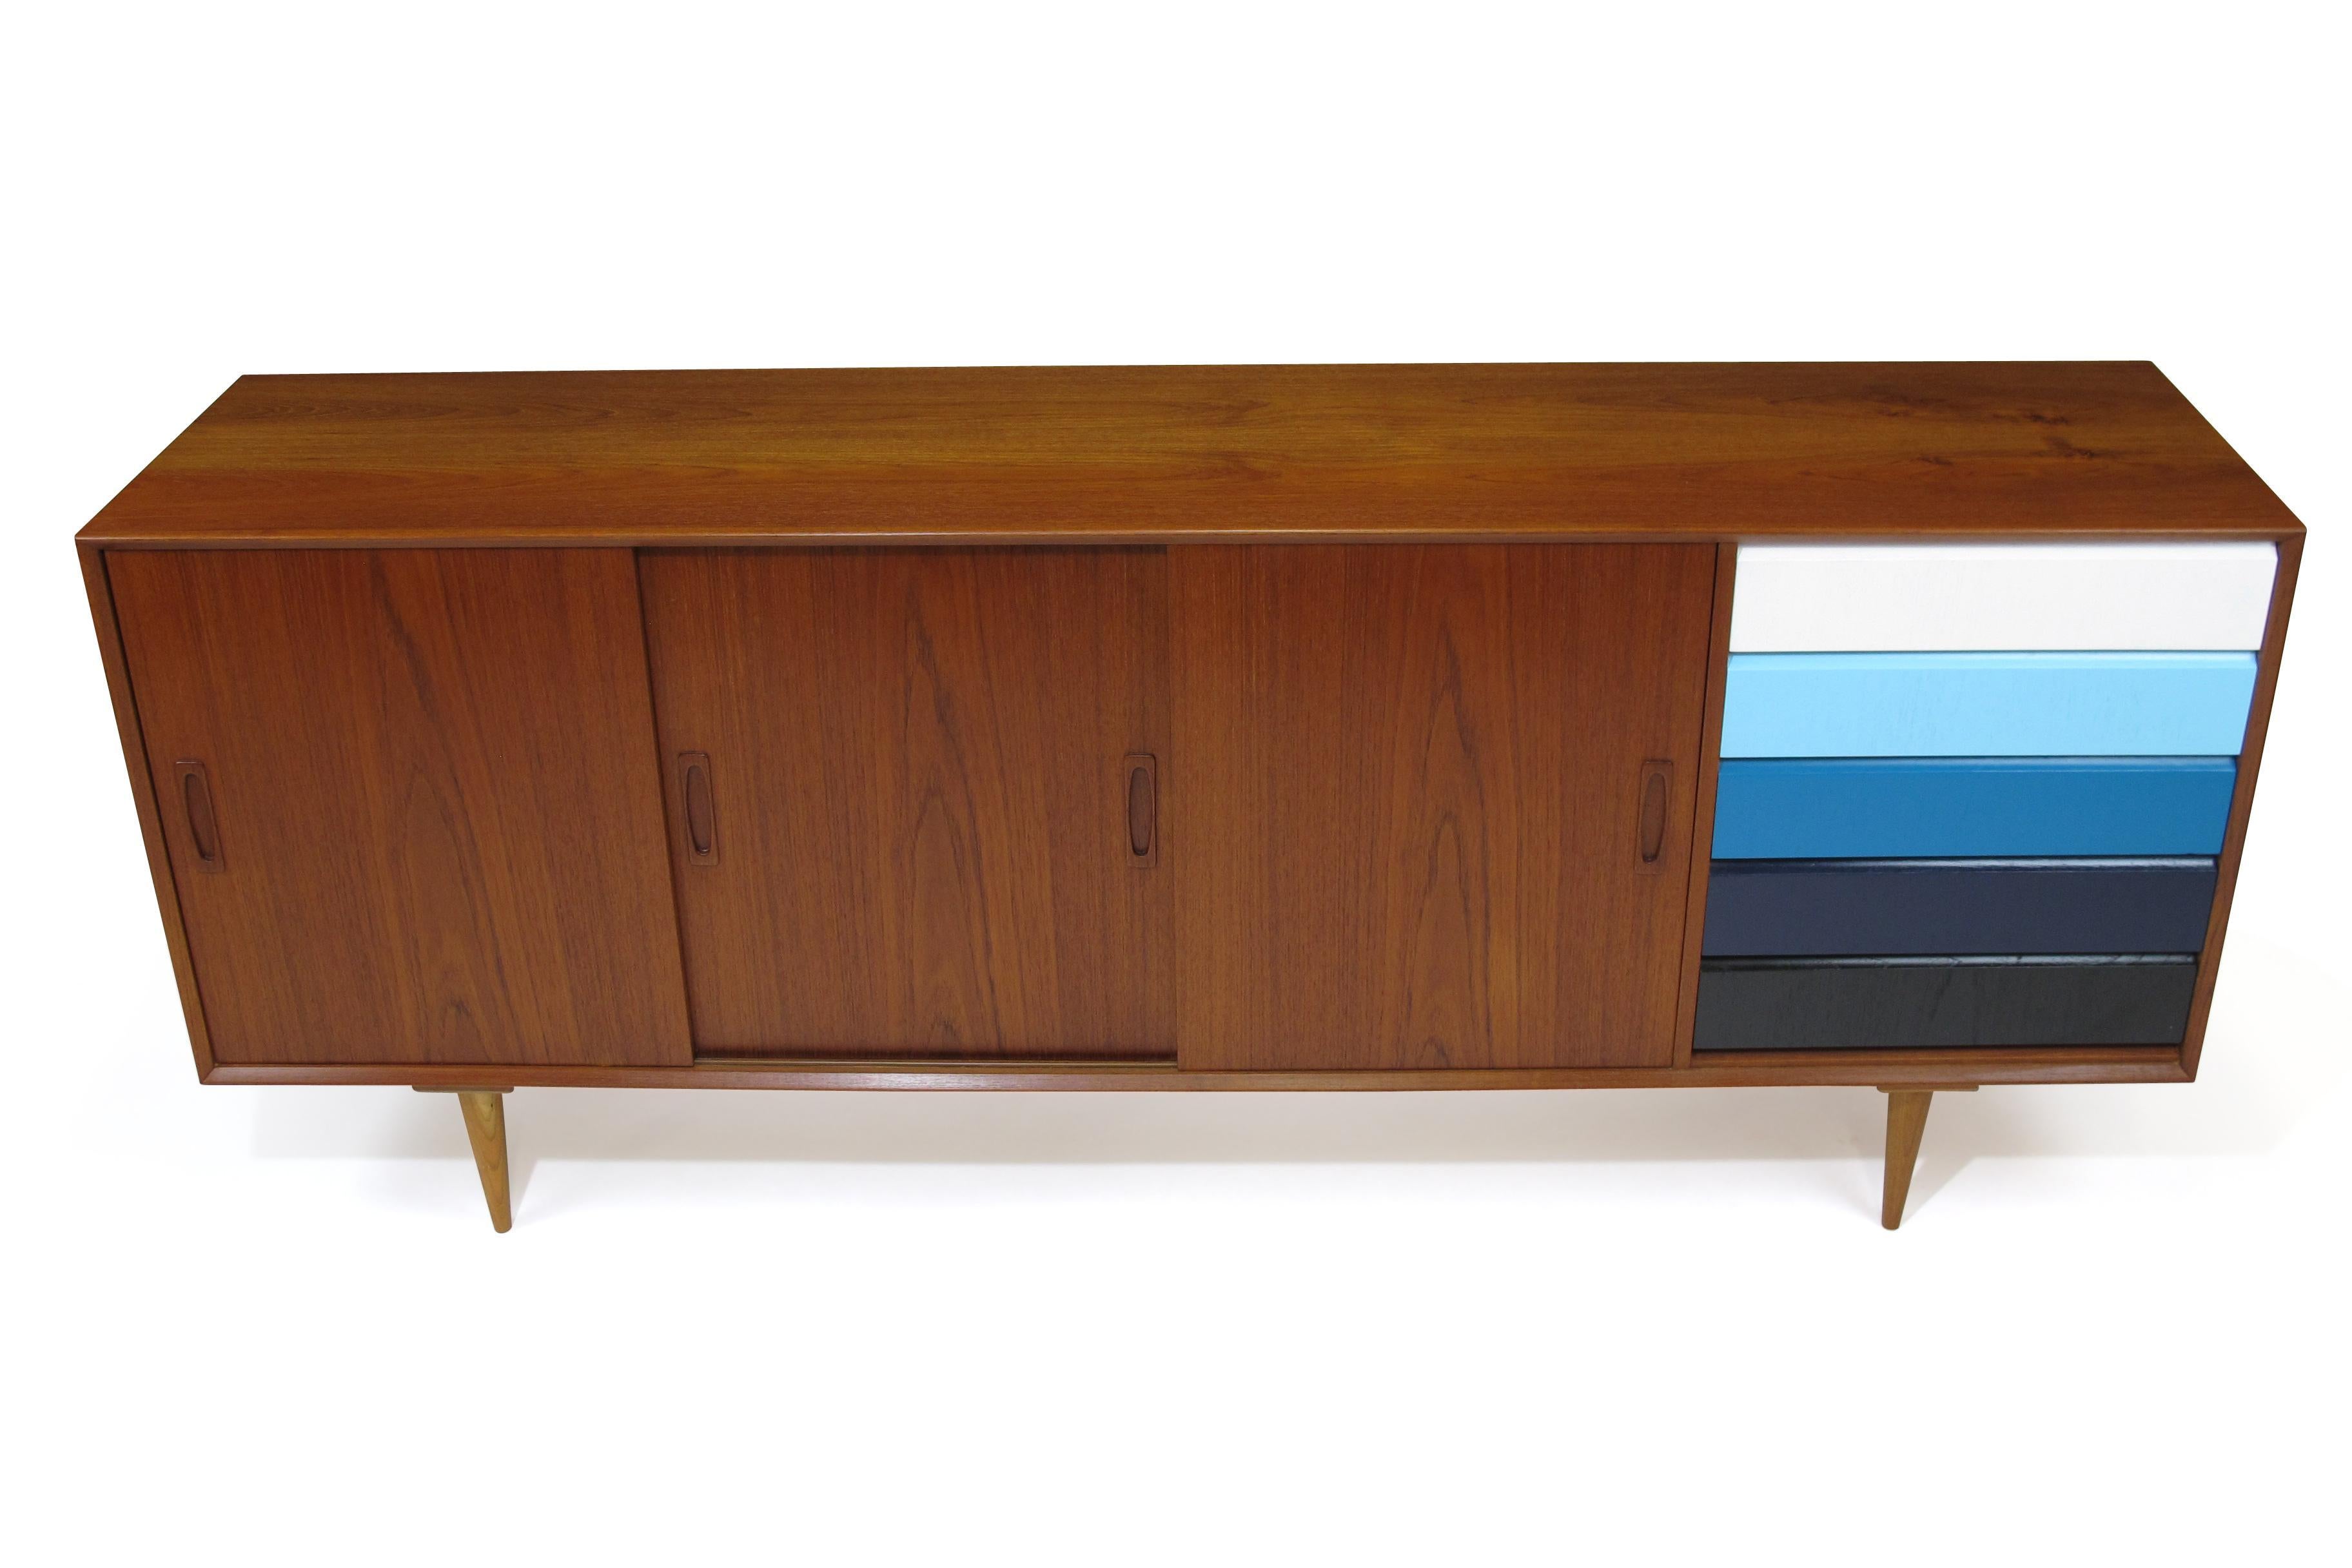 Oiled Teak Credenza with Sliding Doors and Color Blocked Drawers